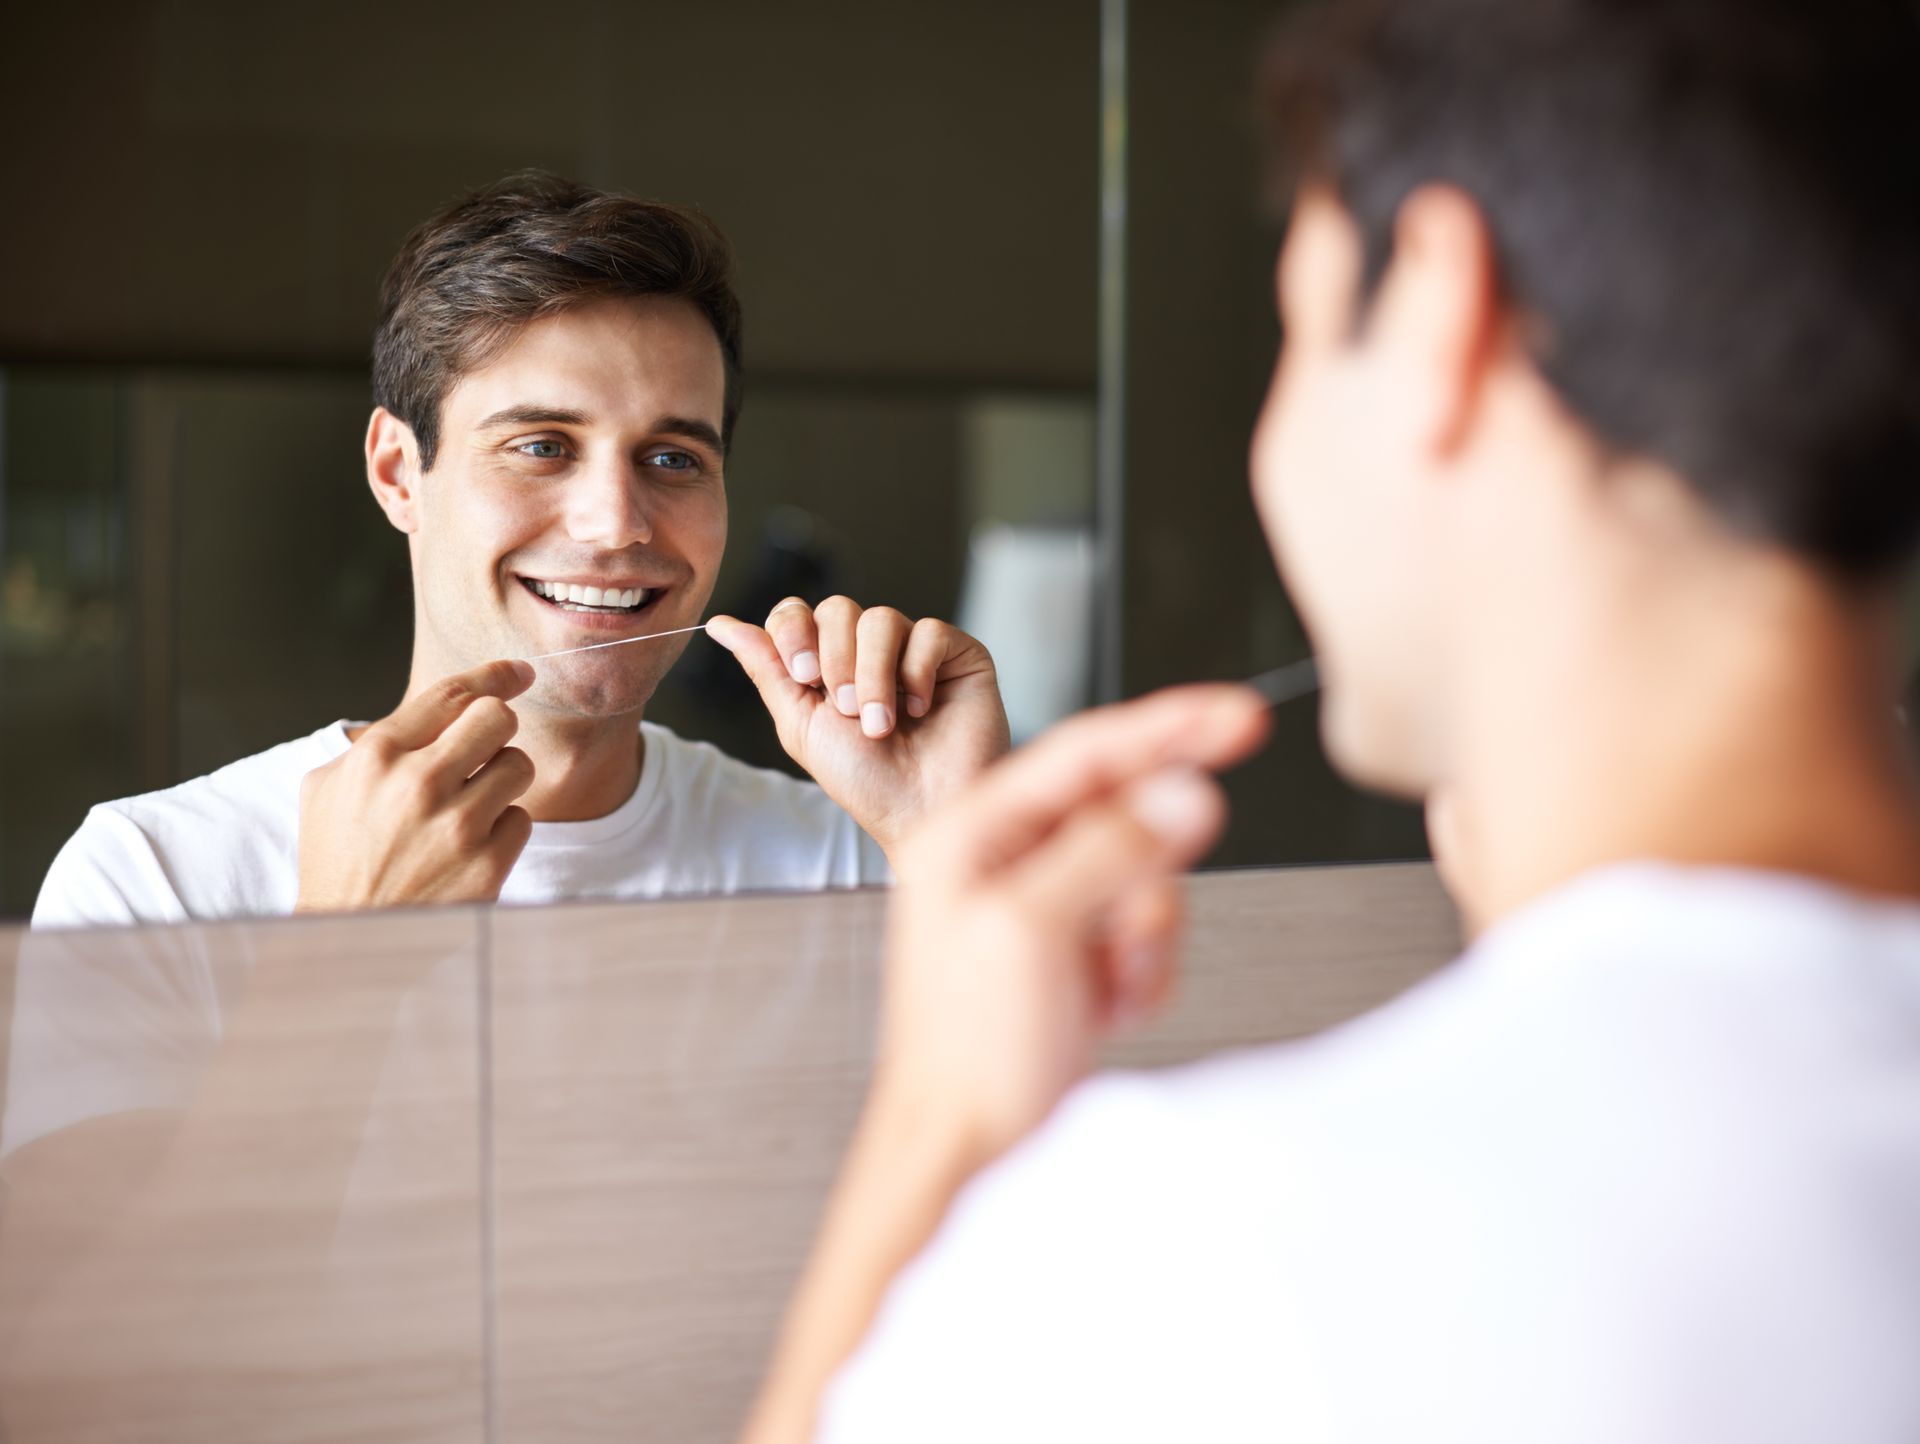 guy in white shirt flossing in front of the mirror